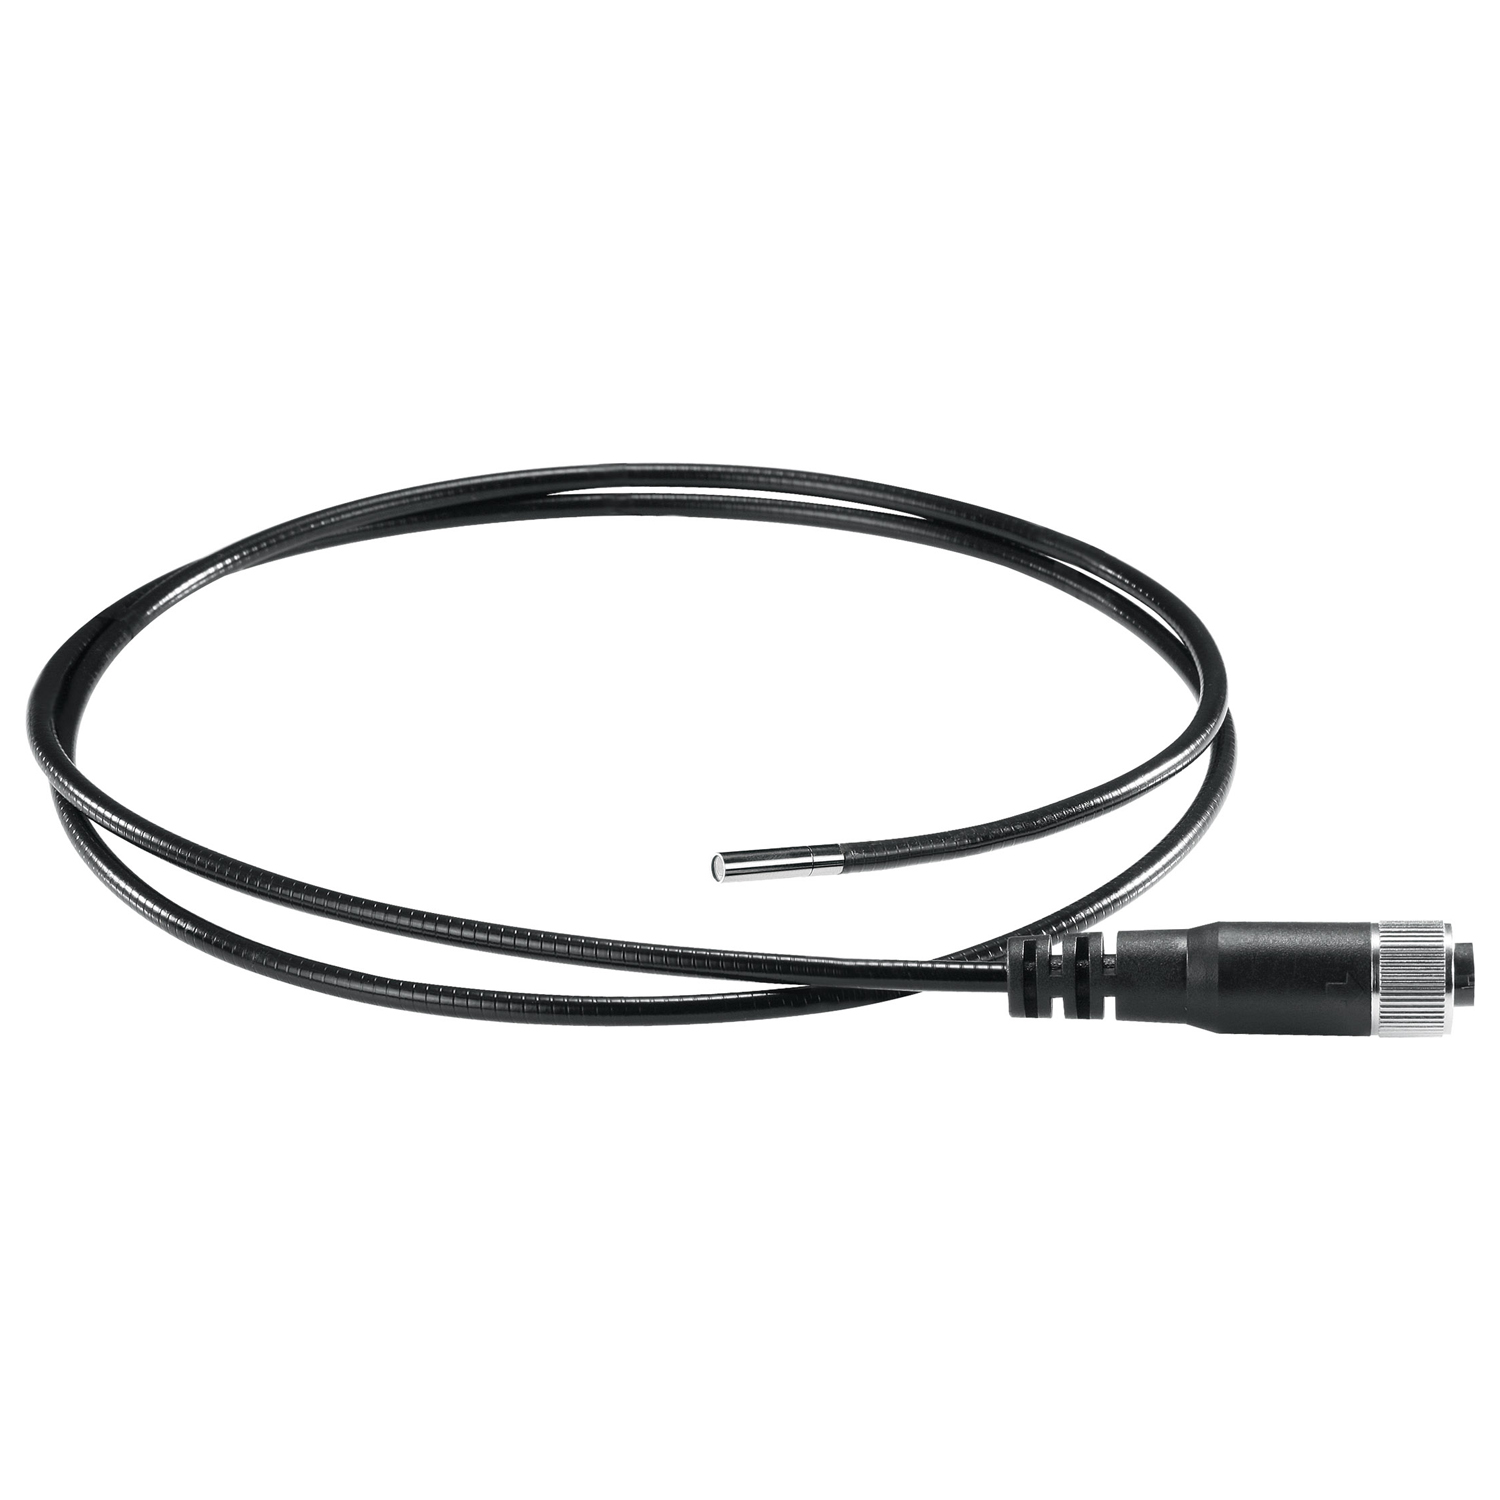 ACDelco Power Tool - CIC501 Hard Camera Cable (2M)  4.5mm